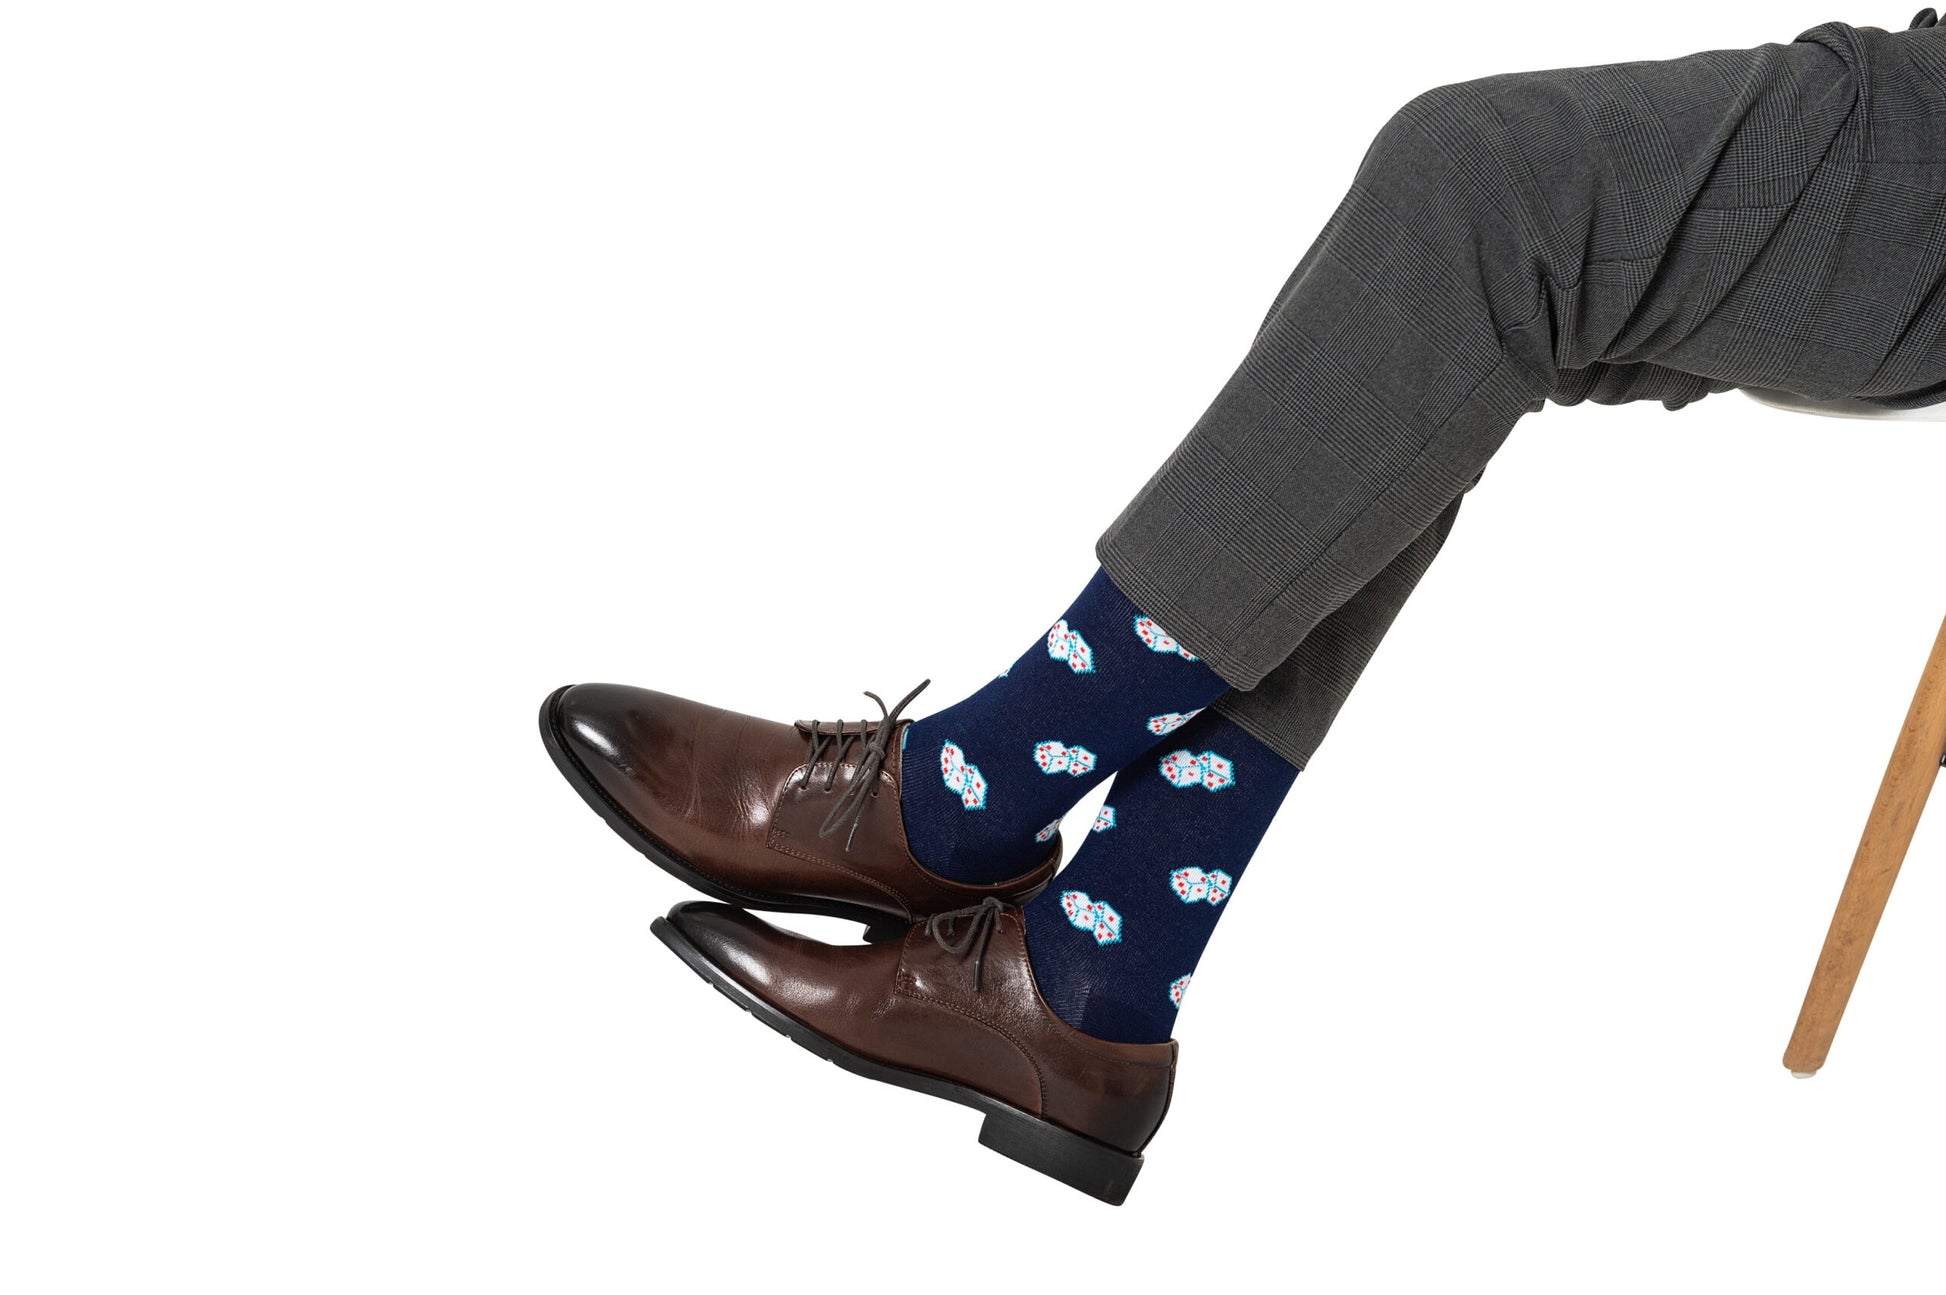 A pair of legs with brown shoes and Dice Socks.